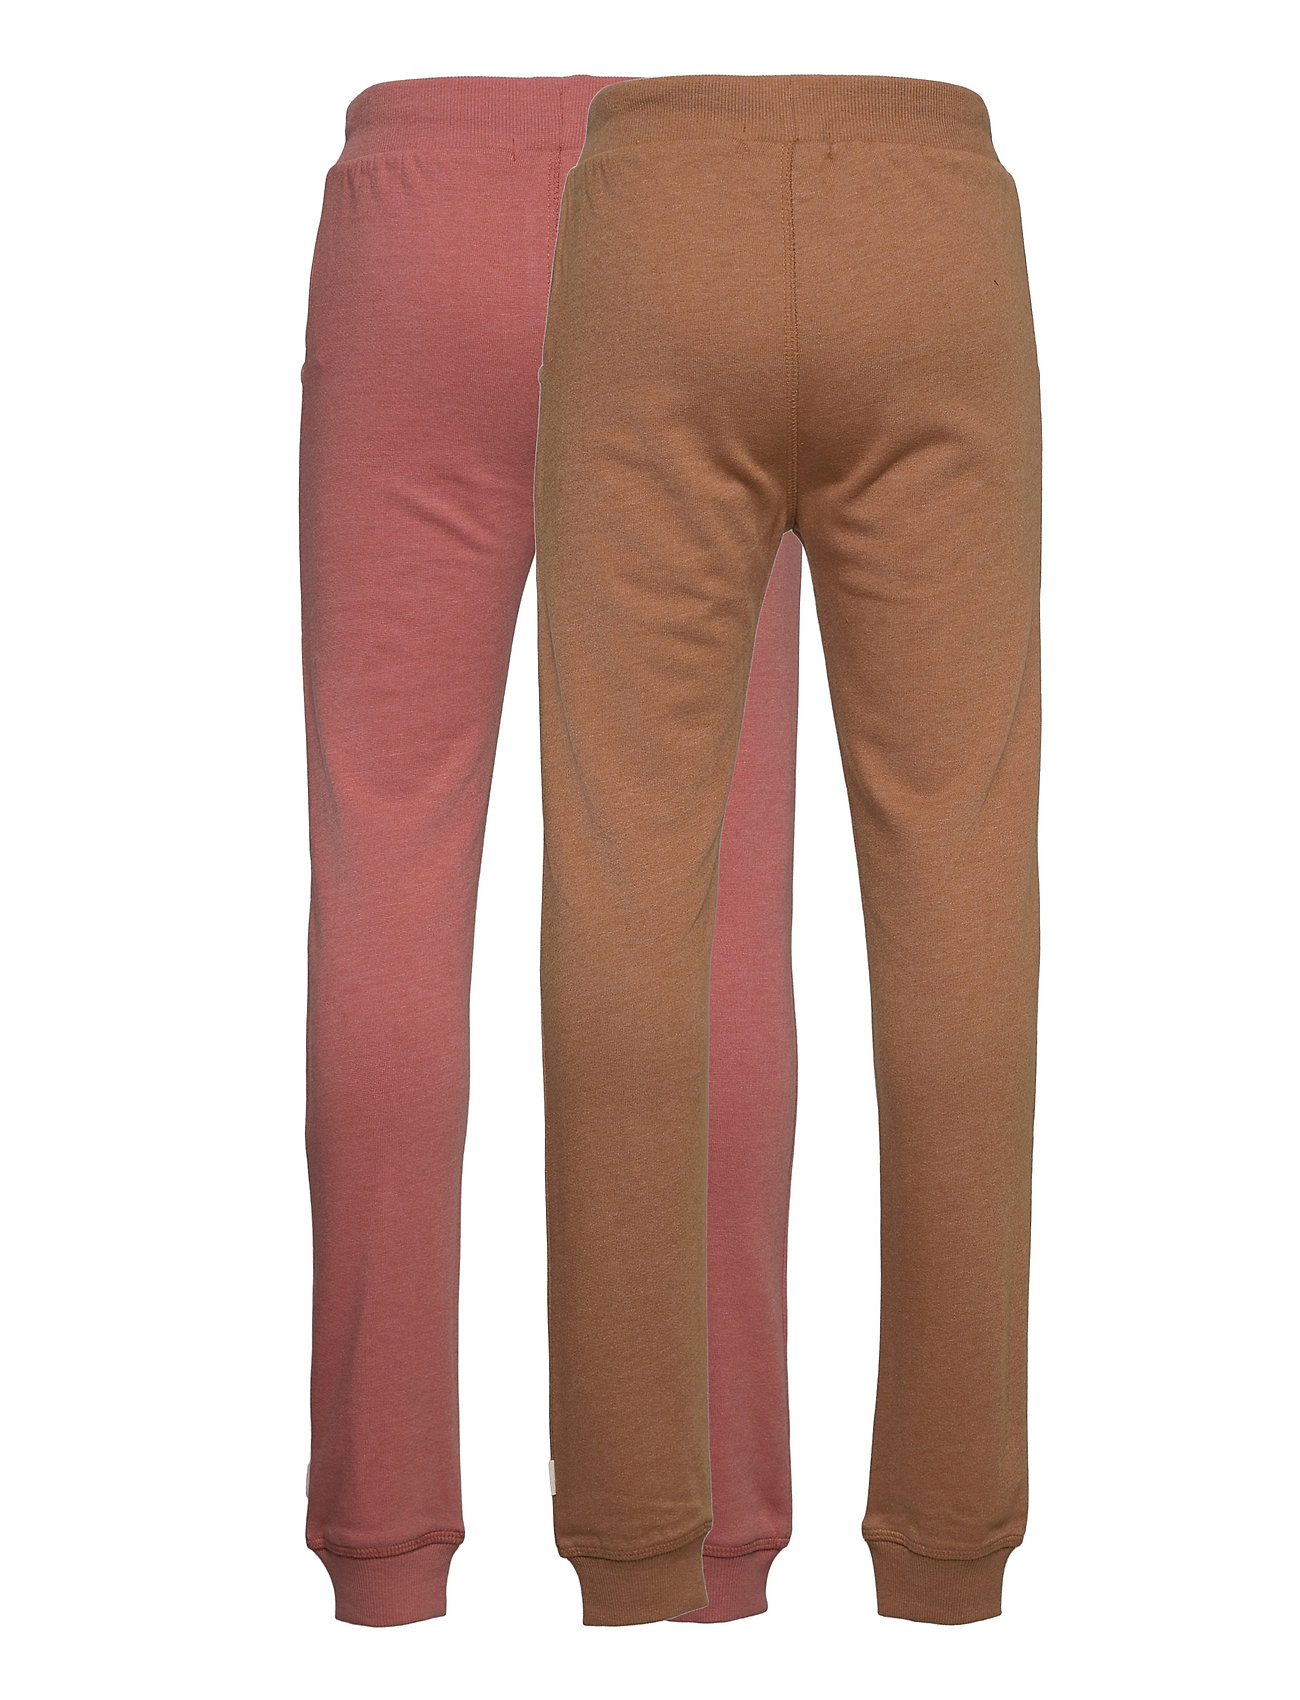 Minymo - Basic 37 -Sweat pant (2-pack) - lowest prices - canyon rose - 1